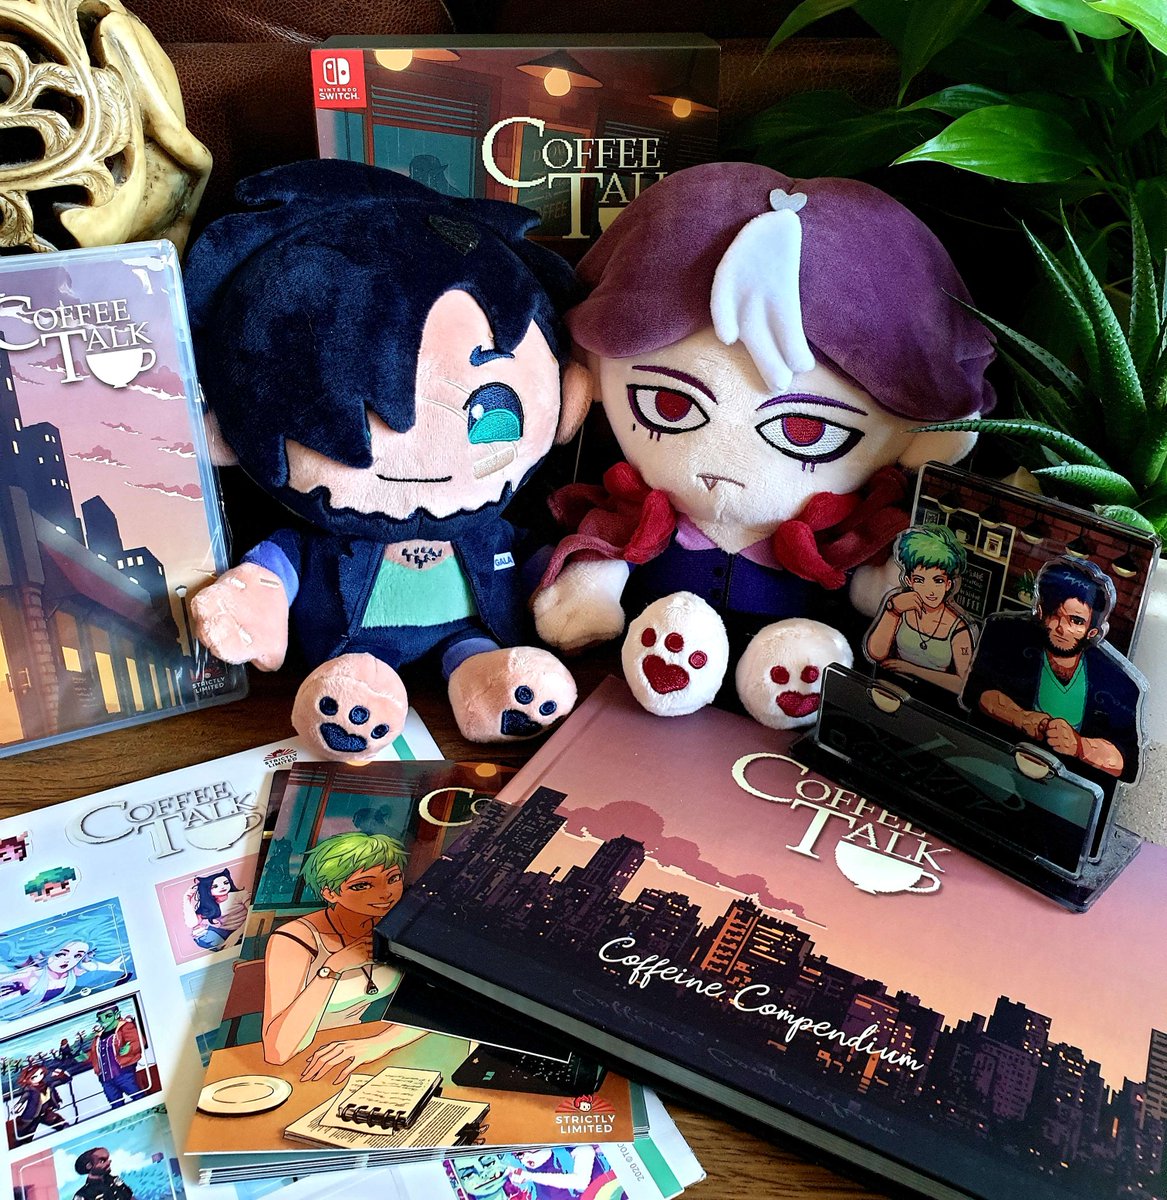 Some amazing arrivals today - Shinji, Gala and Hyde from @Makeship. Thank you so much - a delivery from you always makes my day better! :) @coffeetalk_game @togeproductions @KaizenGameWorks